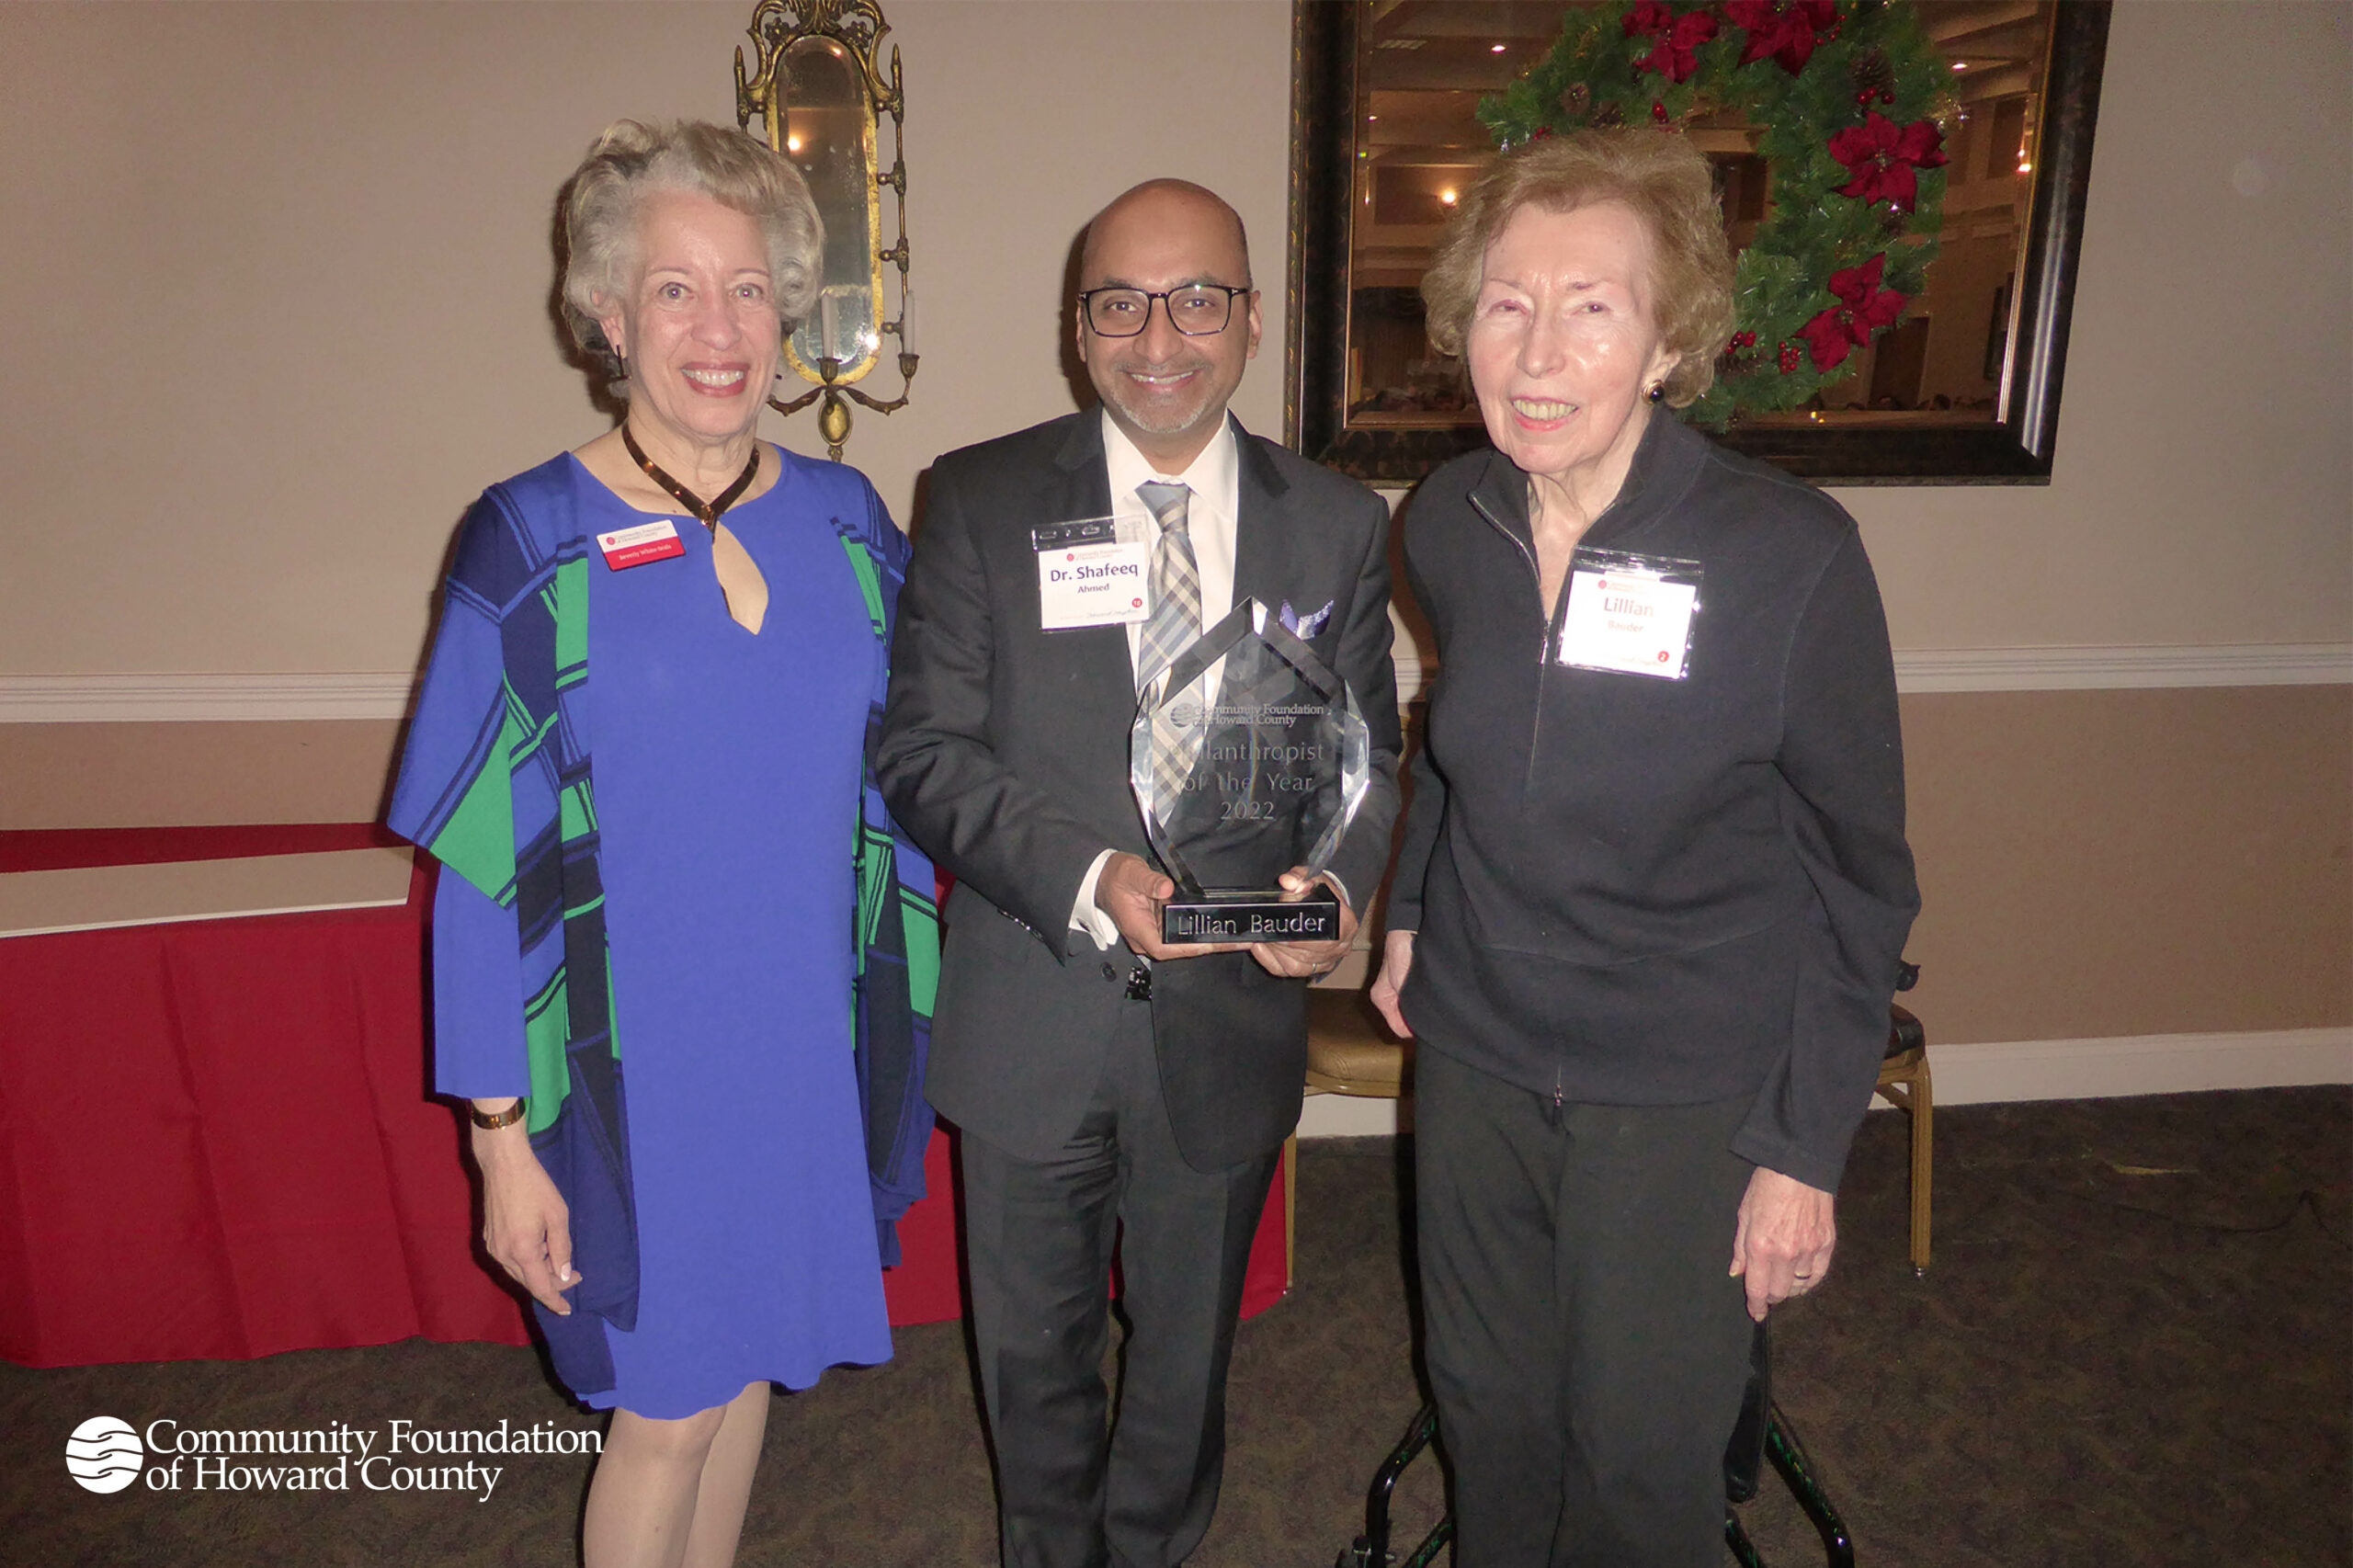 2022 Individual Philanthropist of the Year:  Dr. Lillian Bauder forges lifelong path toward social justice and equity